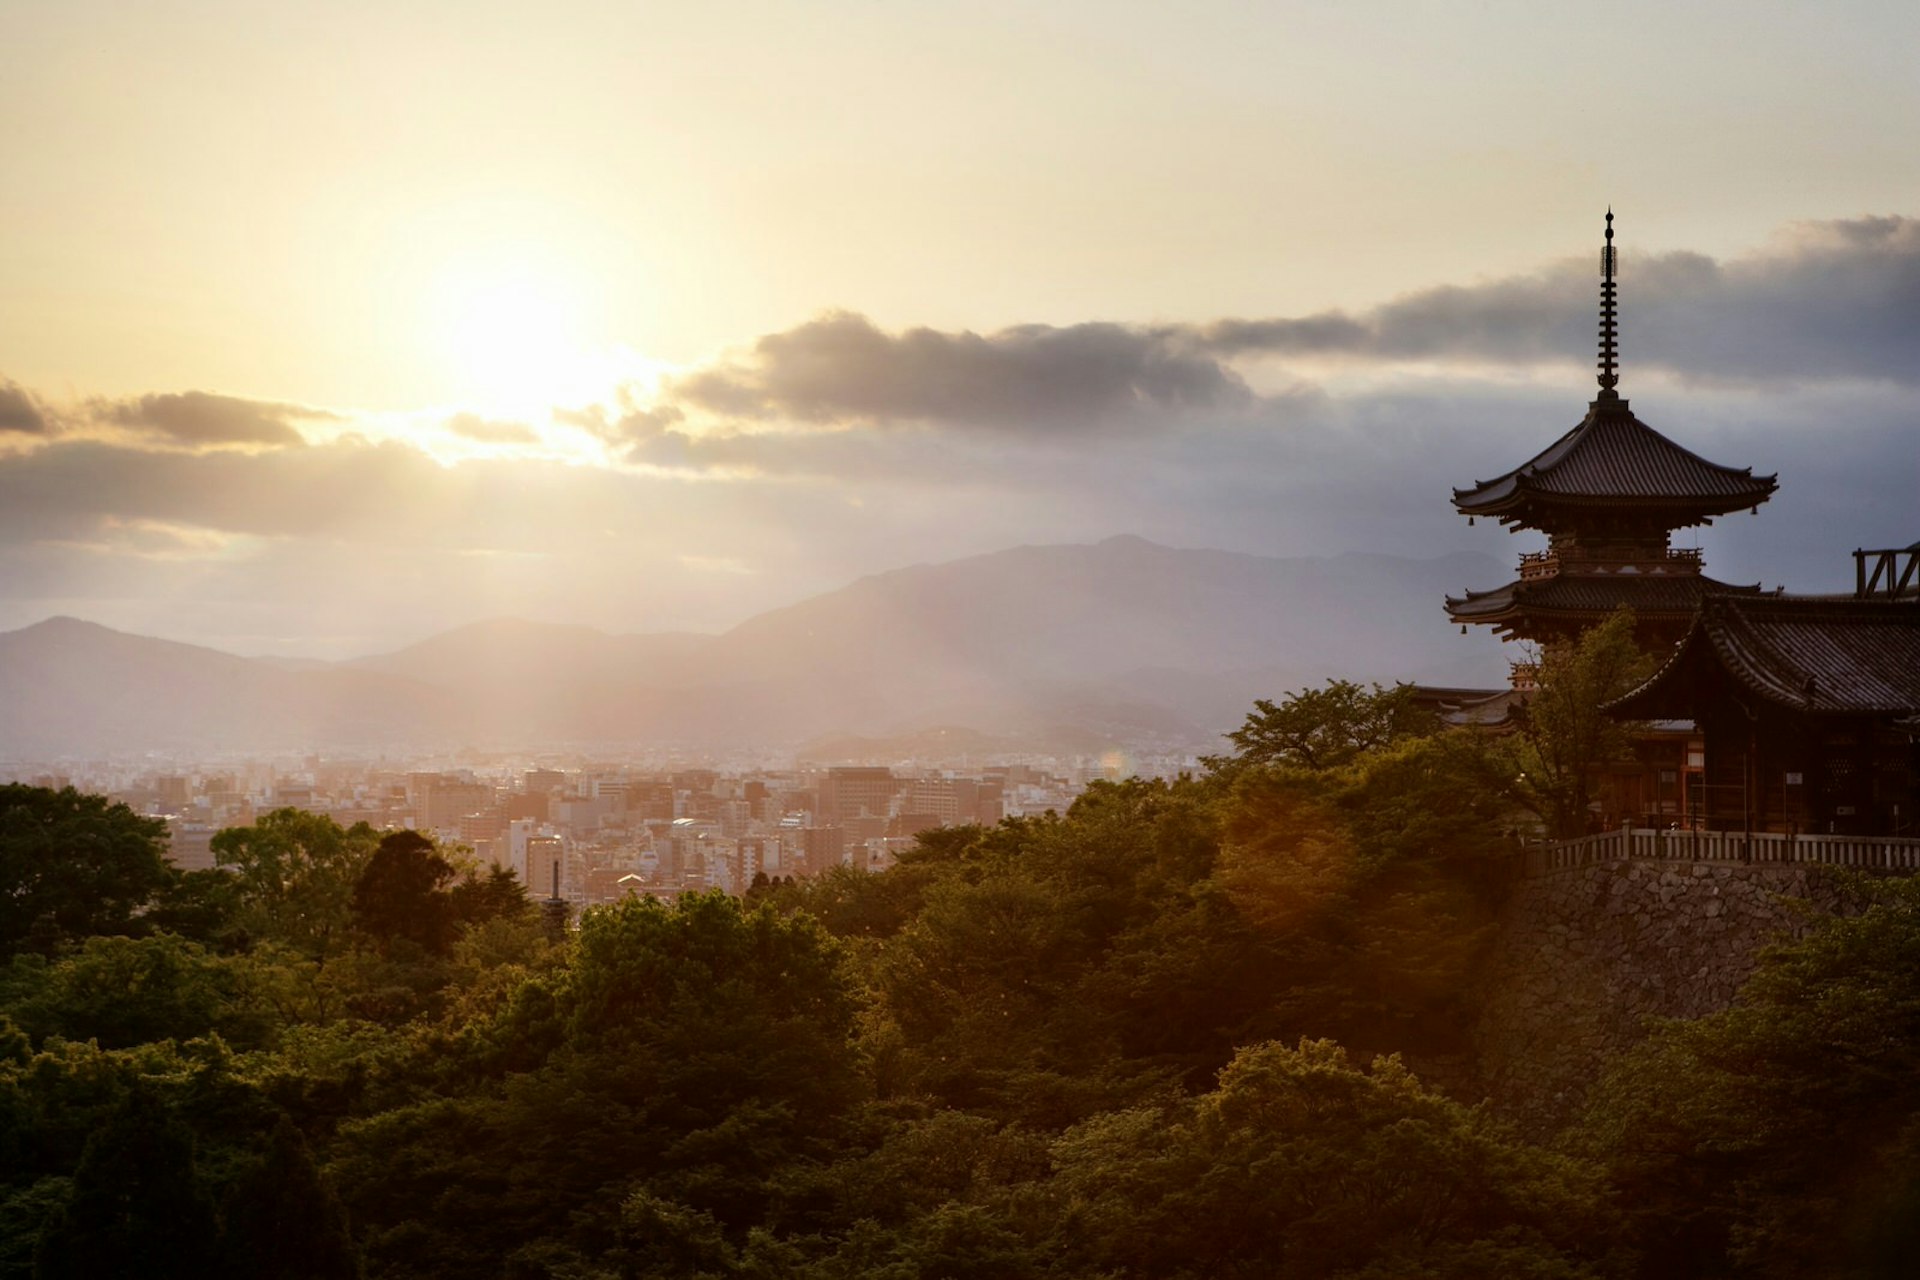 Kyoto glows beneath the early morning light, as seen from the Kiyomizu-dera temple 